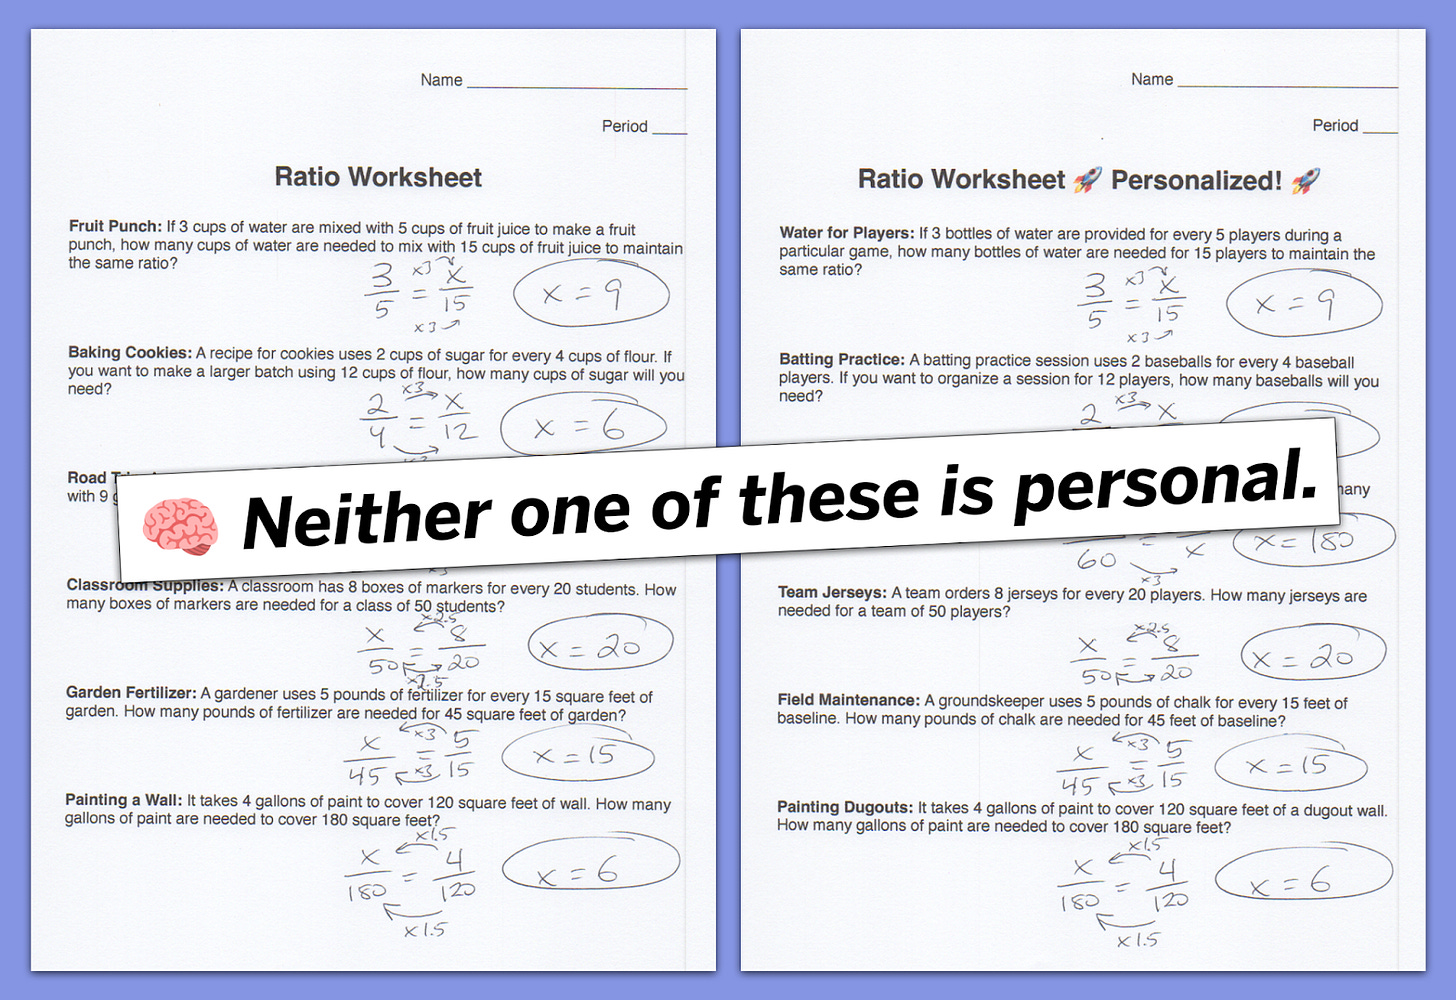 An image of a ratio worksheet and a ratio worksheet that's "personalized". The student work is exactly the same on both and a headline says "Neither one of these is personal."